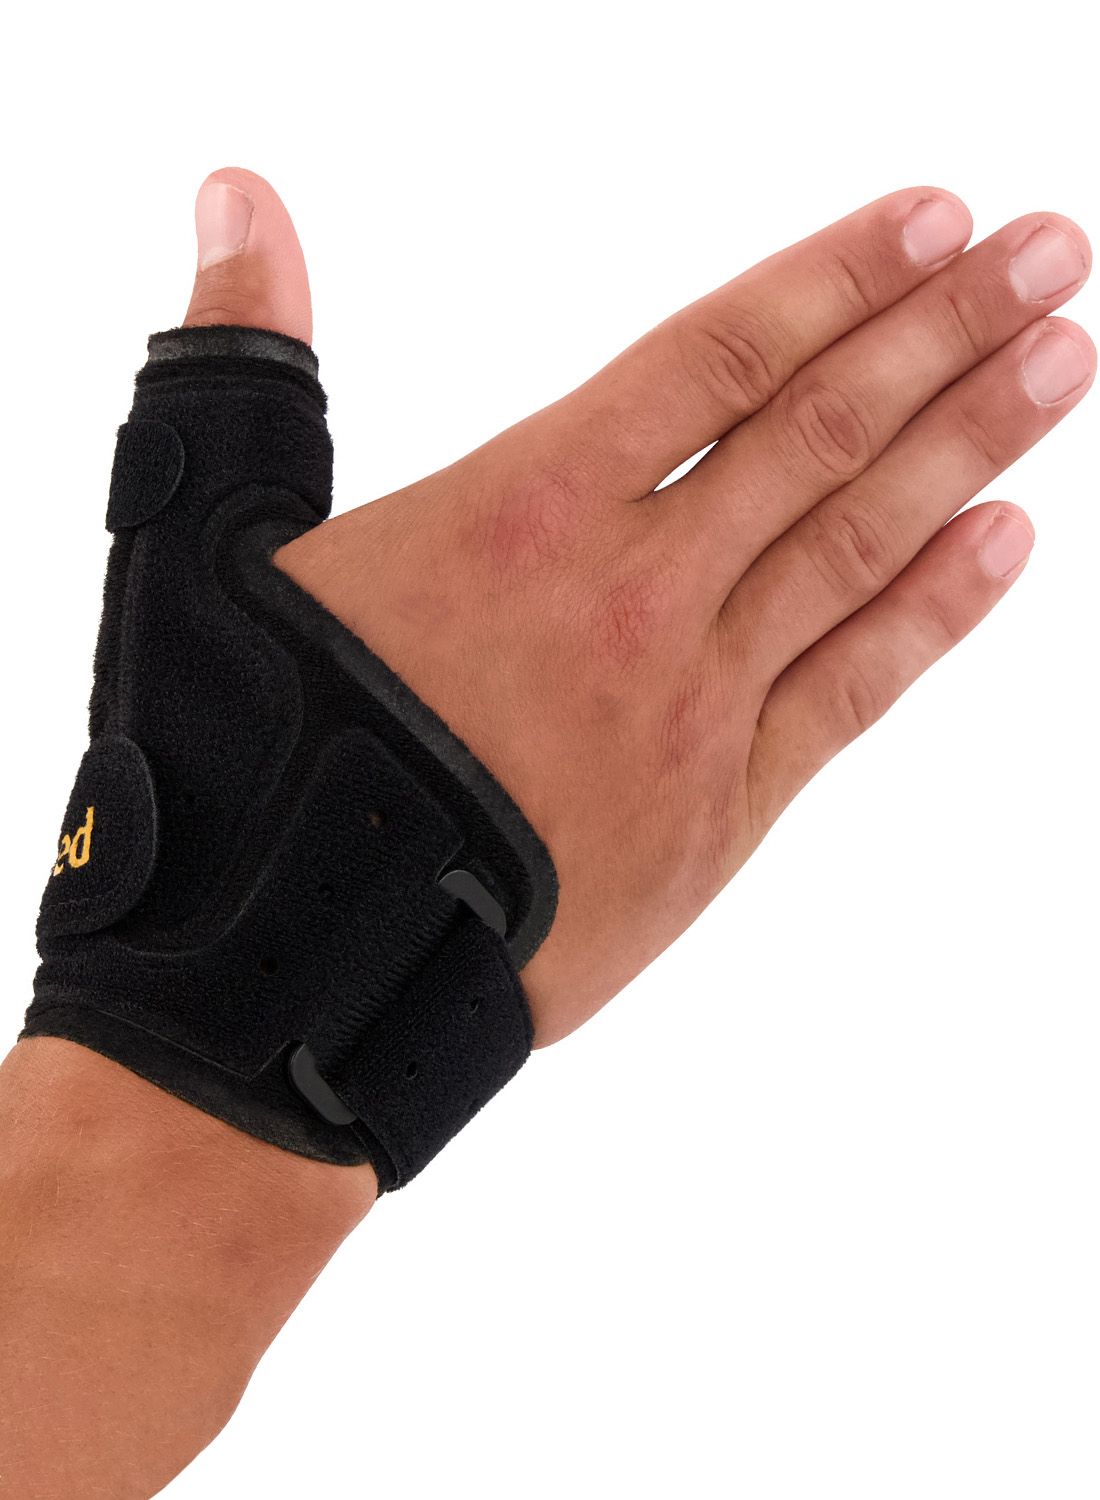 dunimed thumb support